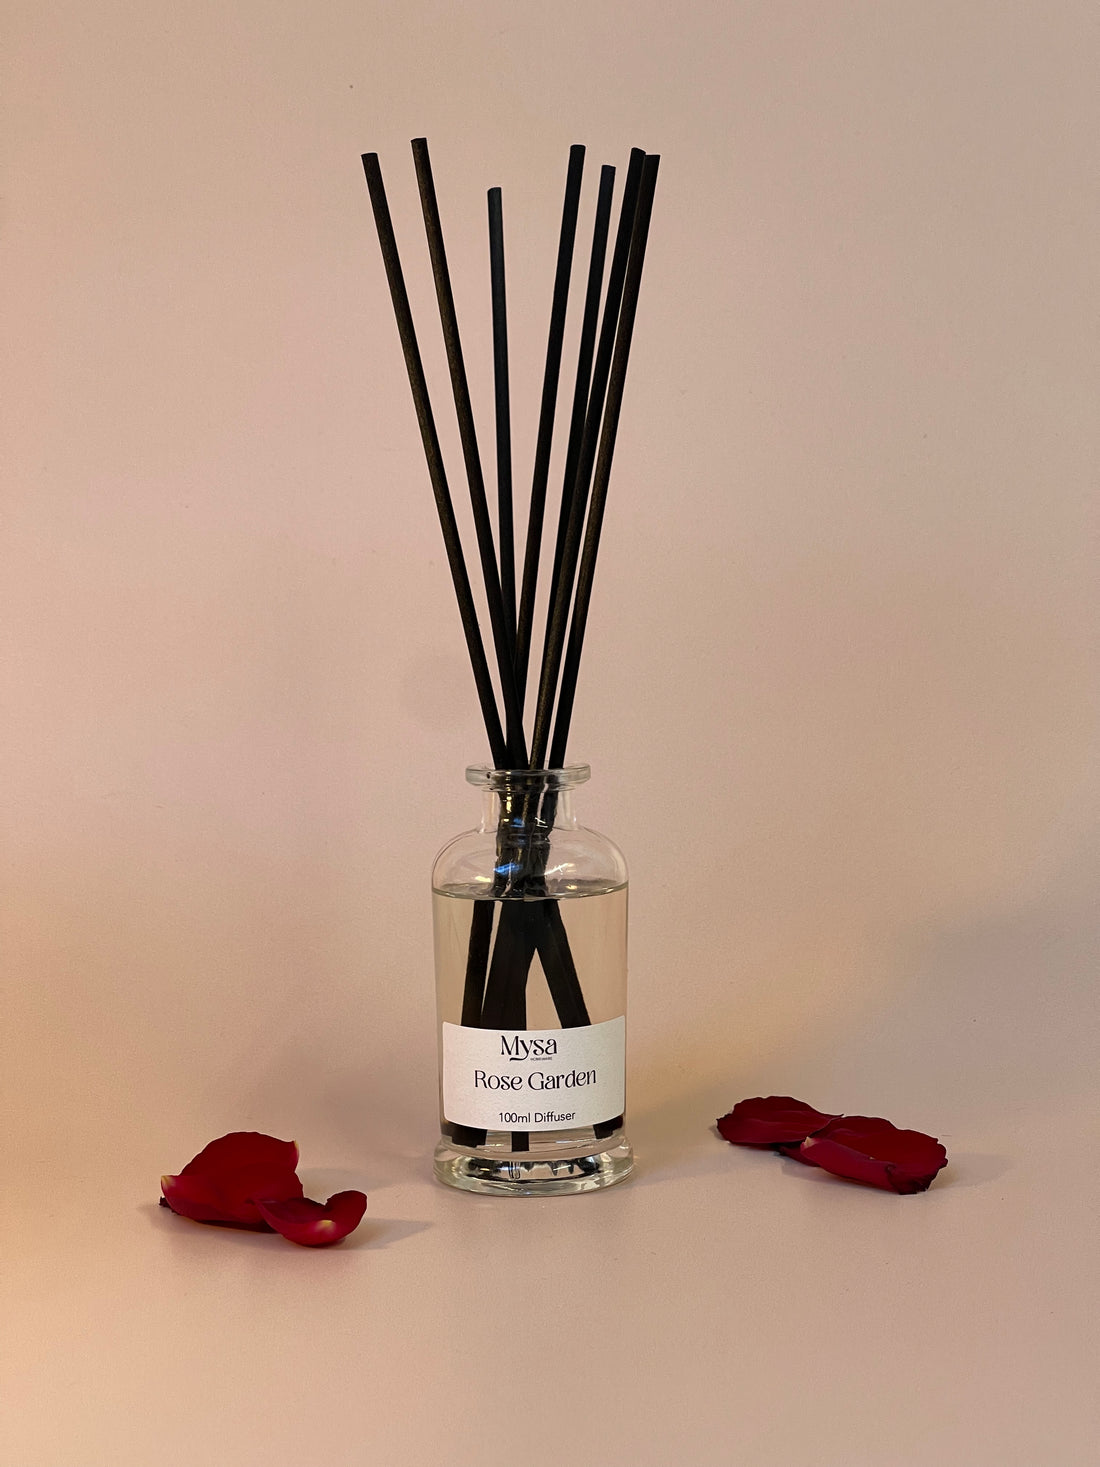 Rose Garden luxury reed diffuser in gift box, featuring a vegan base oil infused with English roses fragrance.